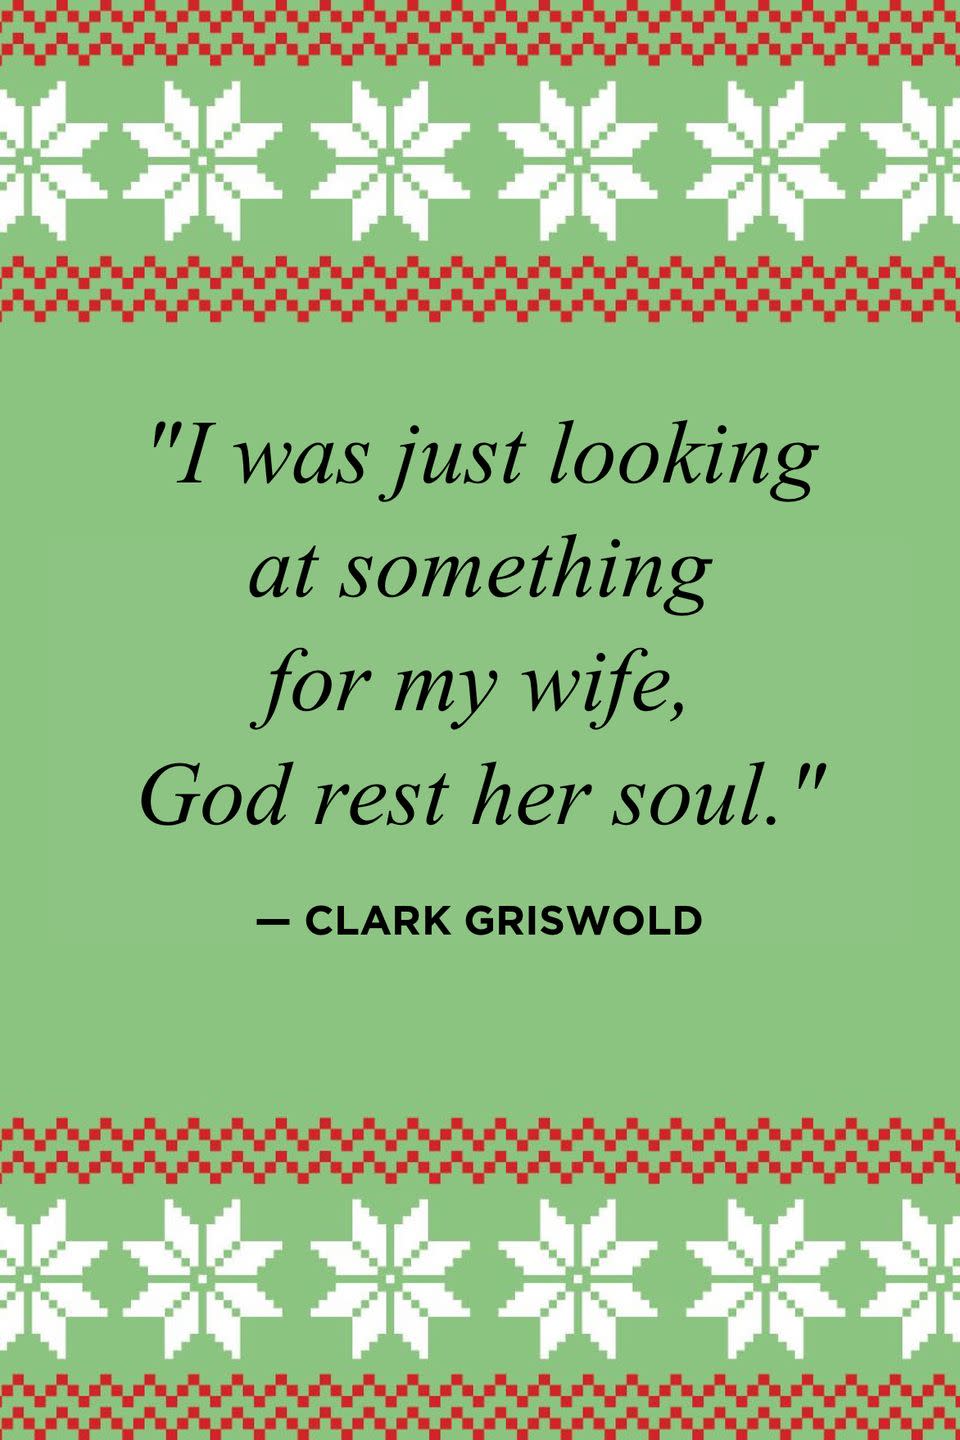 <p>"I was just looking at something for my wife, God rest her soul."</p>